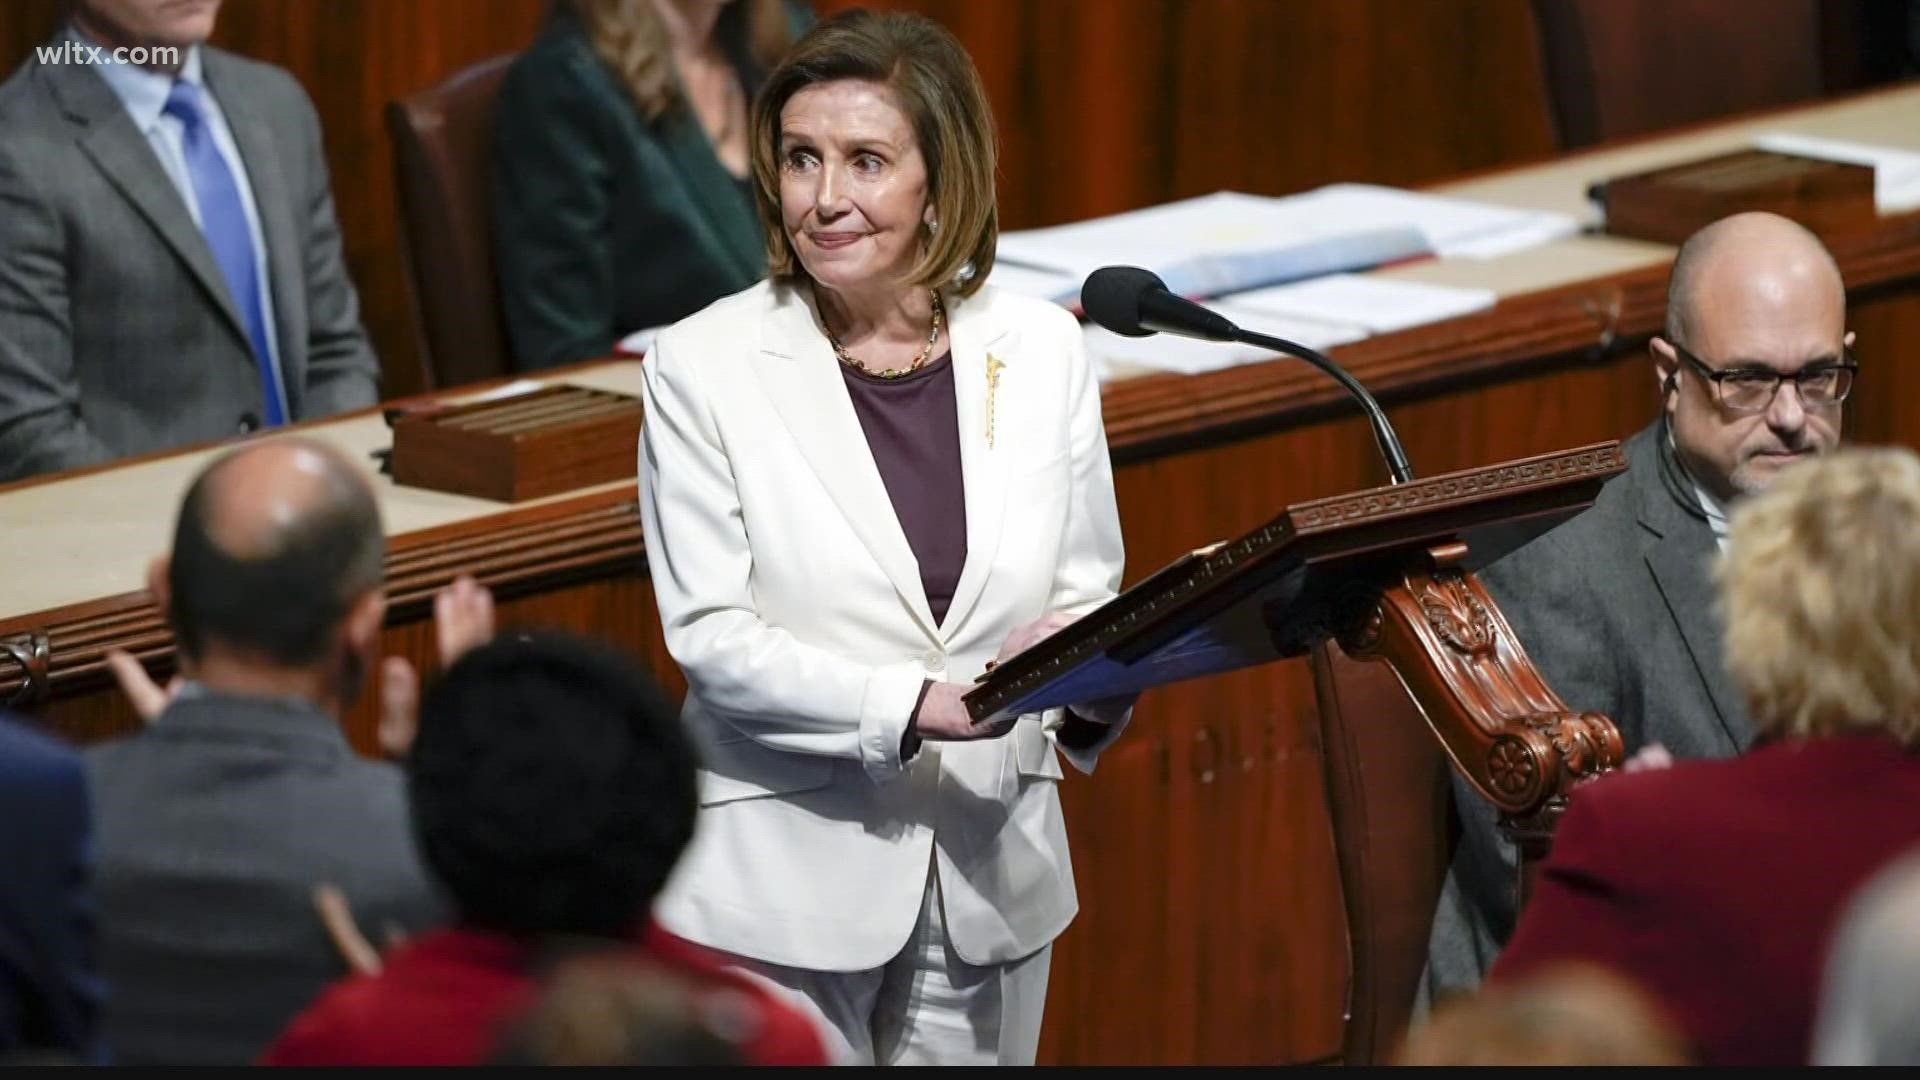 Her decision Thursday paves the way for House Democratic leadership elections next month when Democrats reorganize as the minority party for the new Congress.